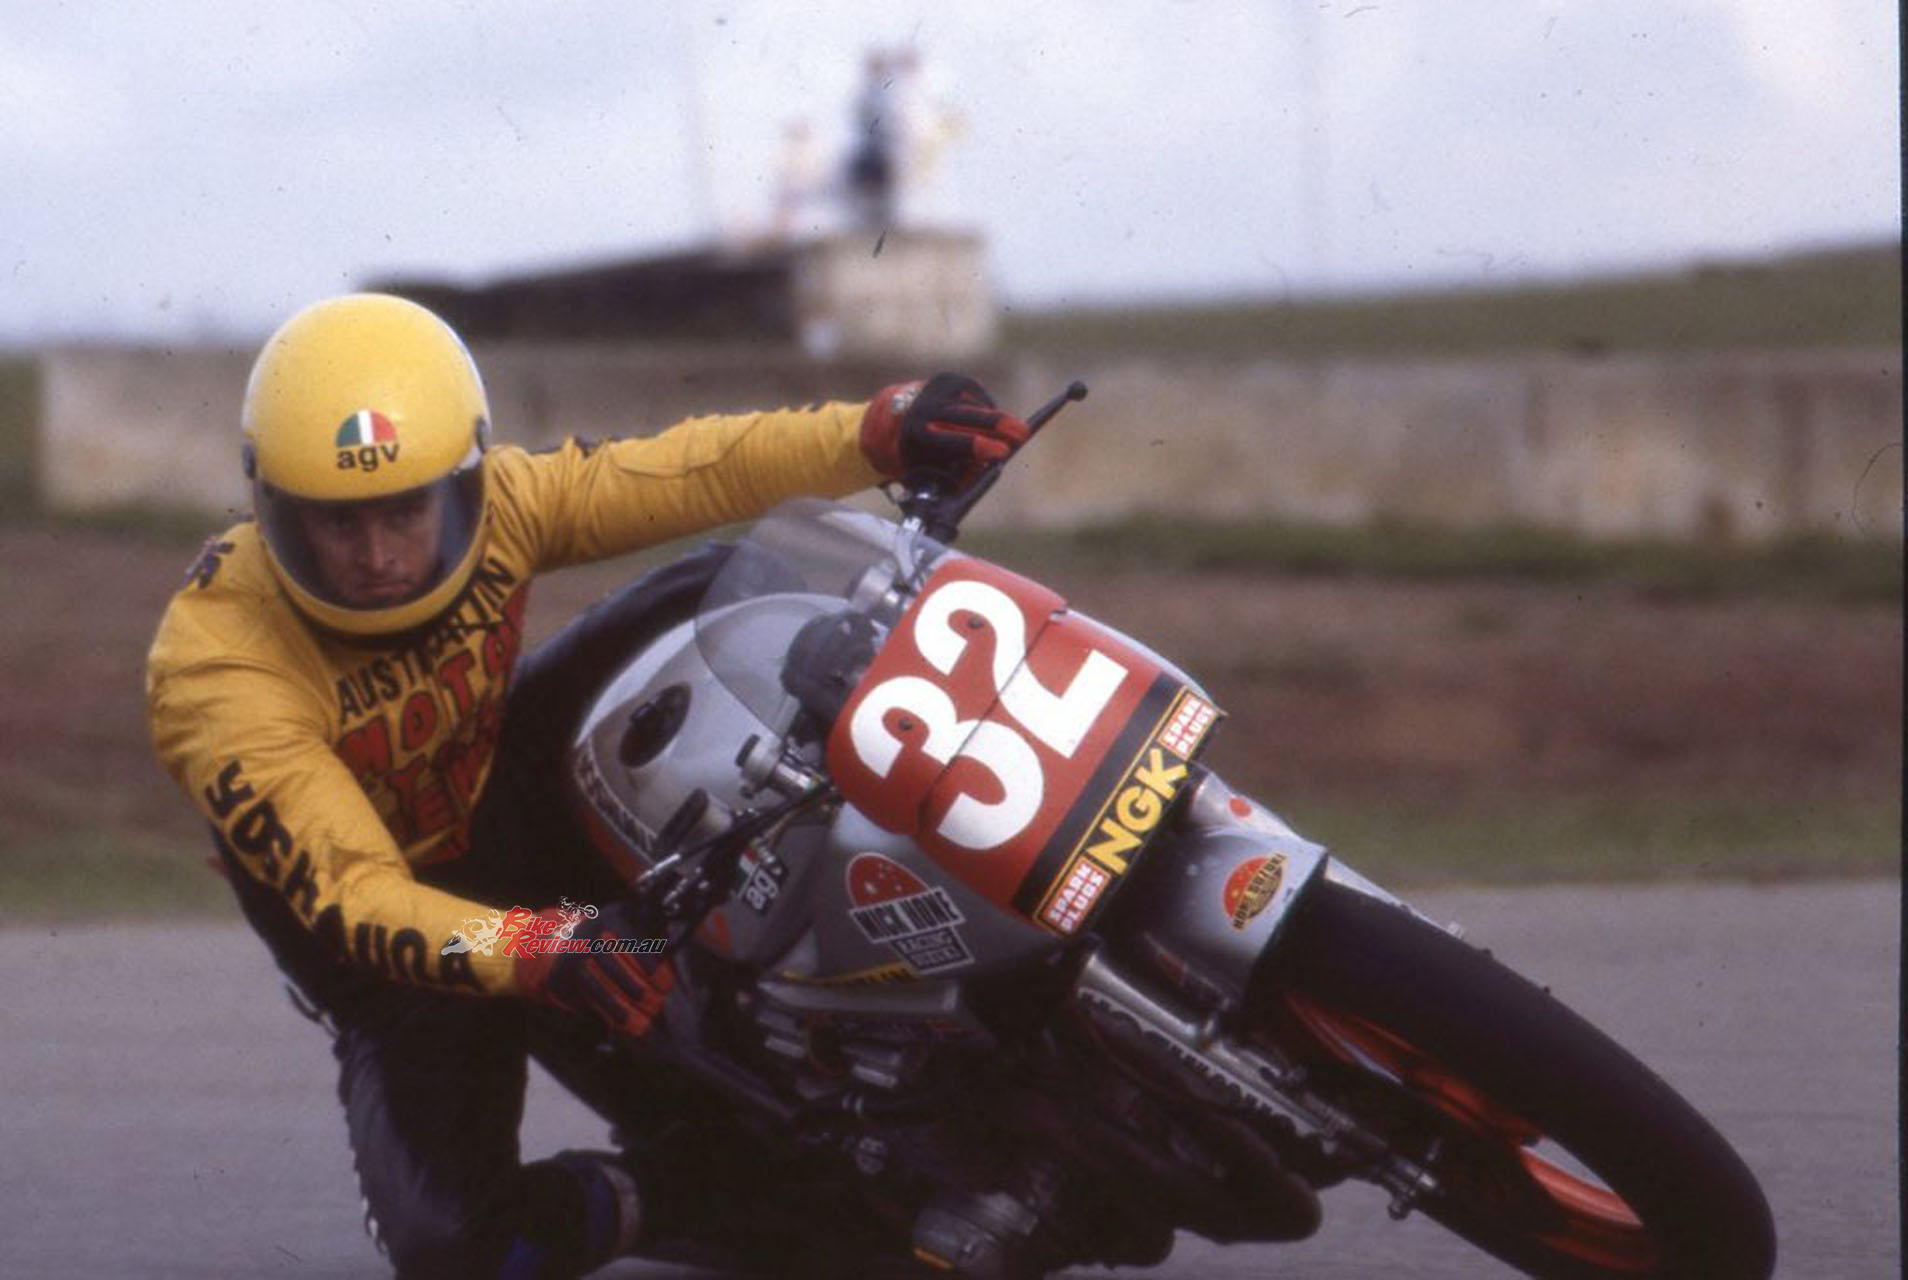 "I won both the Victorian and NSW Superbike titles that year, and then the 1983 (Katana) and 1984 (Suzuki GSX1100EFE, which still sits in Mick Hone's shop) Superbike titles as well."